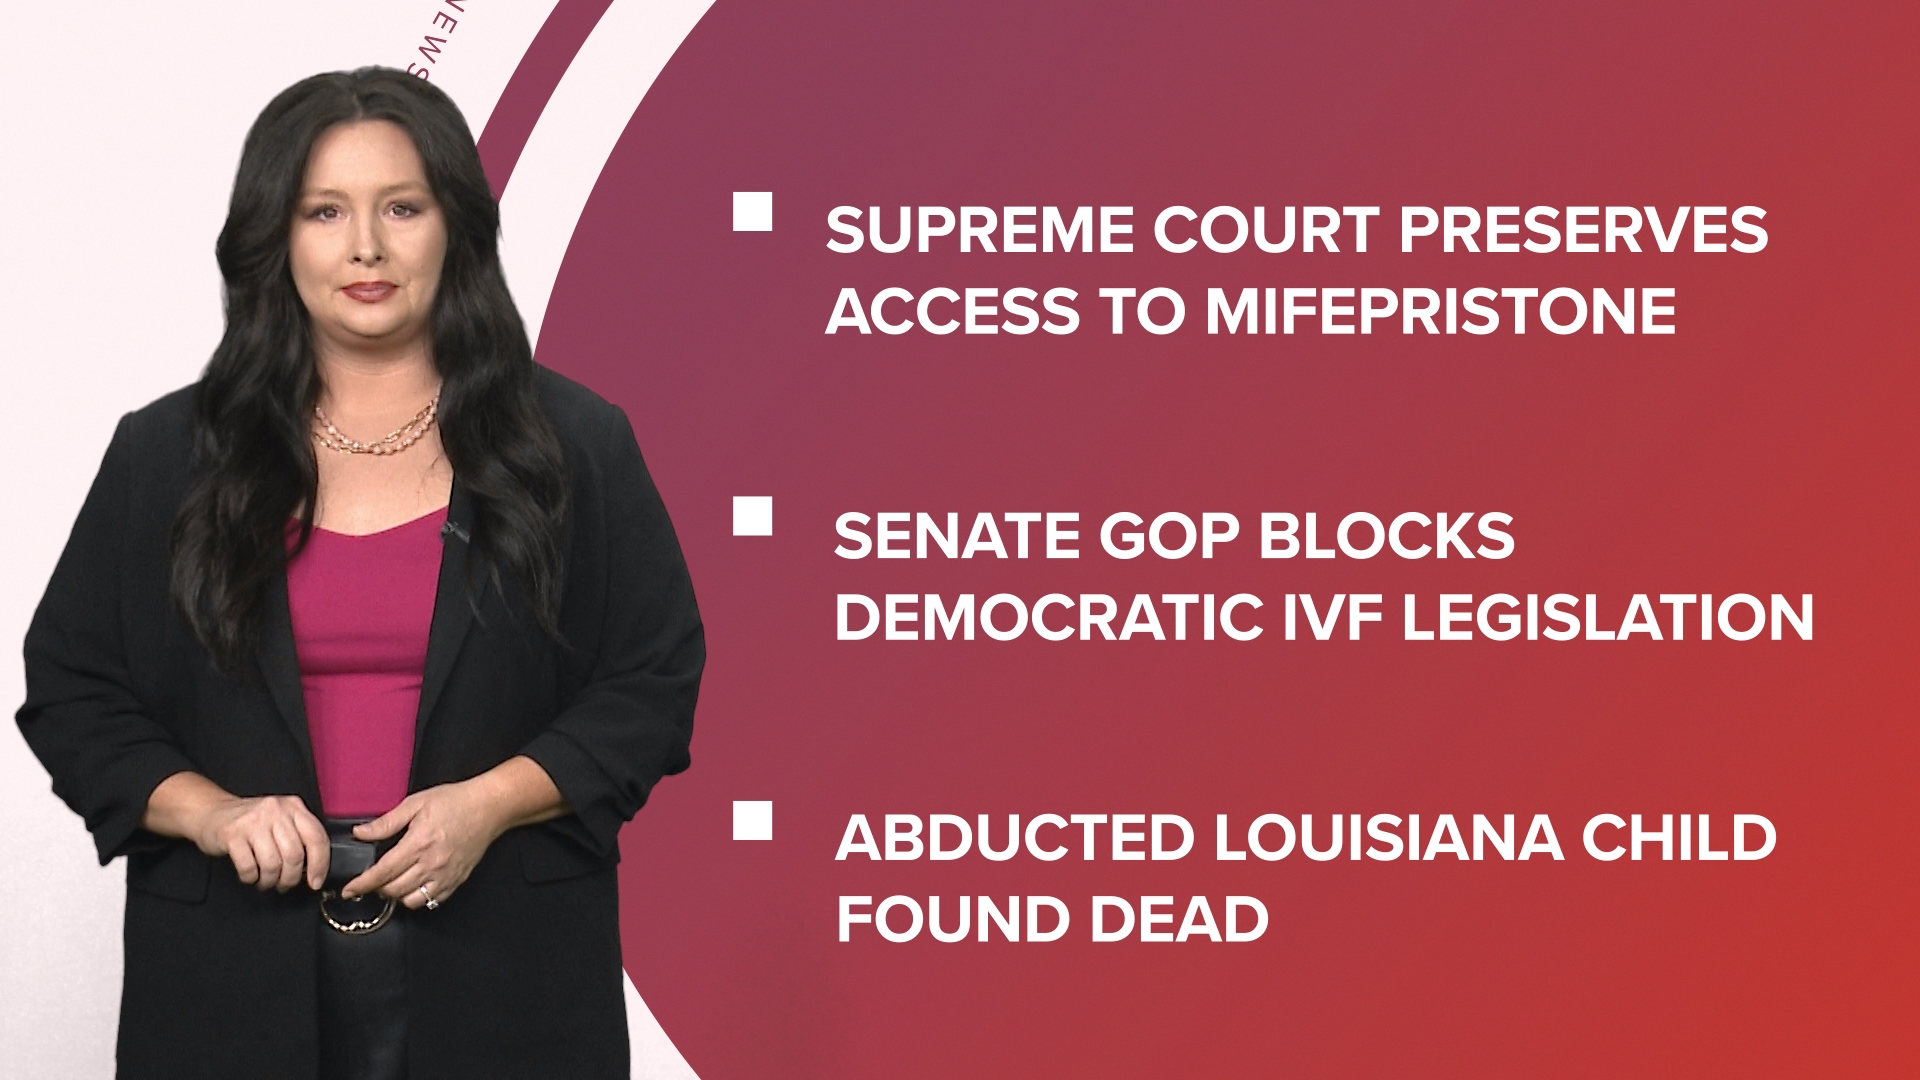 A look at what is happening in the news from the Supreme Court preserving access to mifepristone to Senate GOP blocks IVF legislation and online passport renewal.